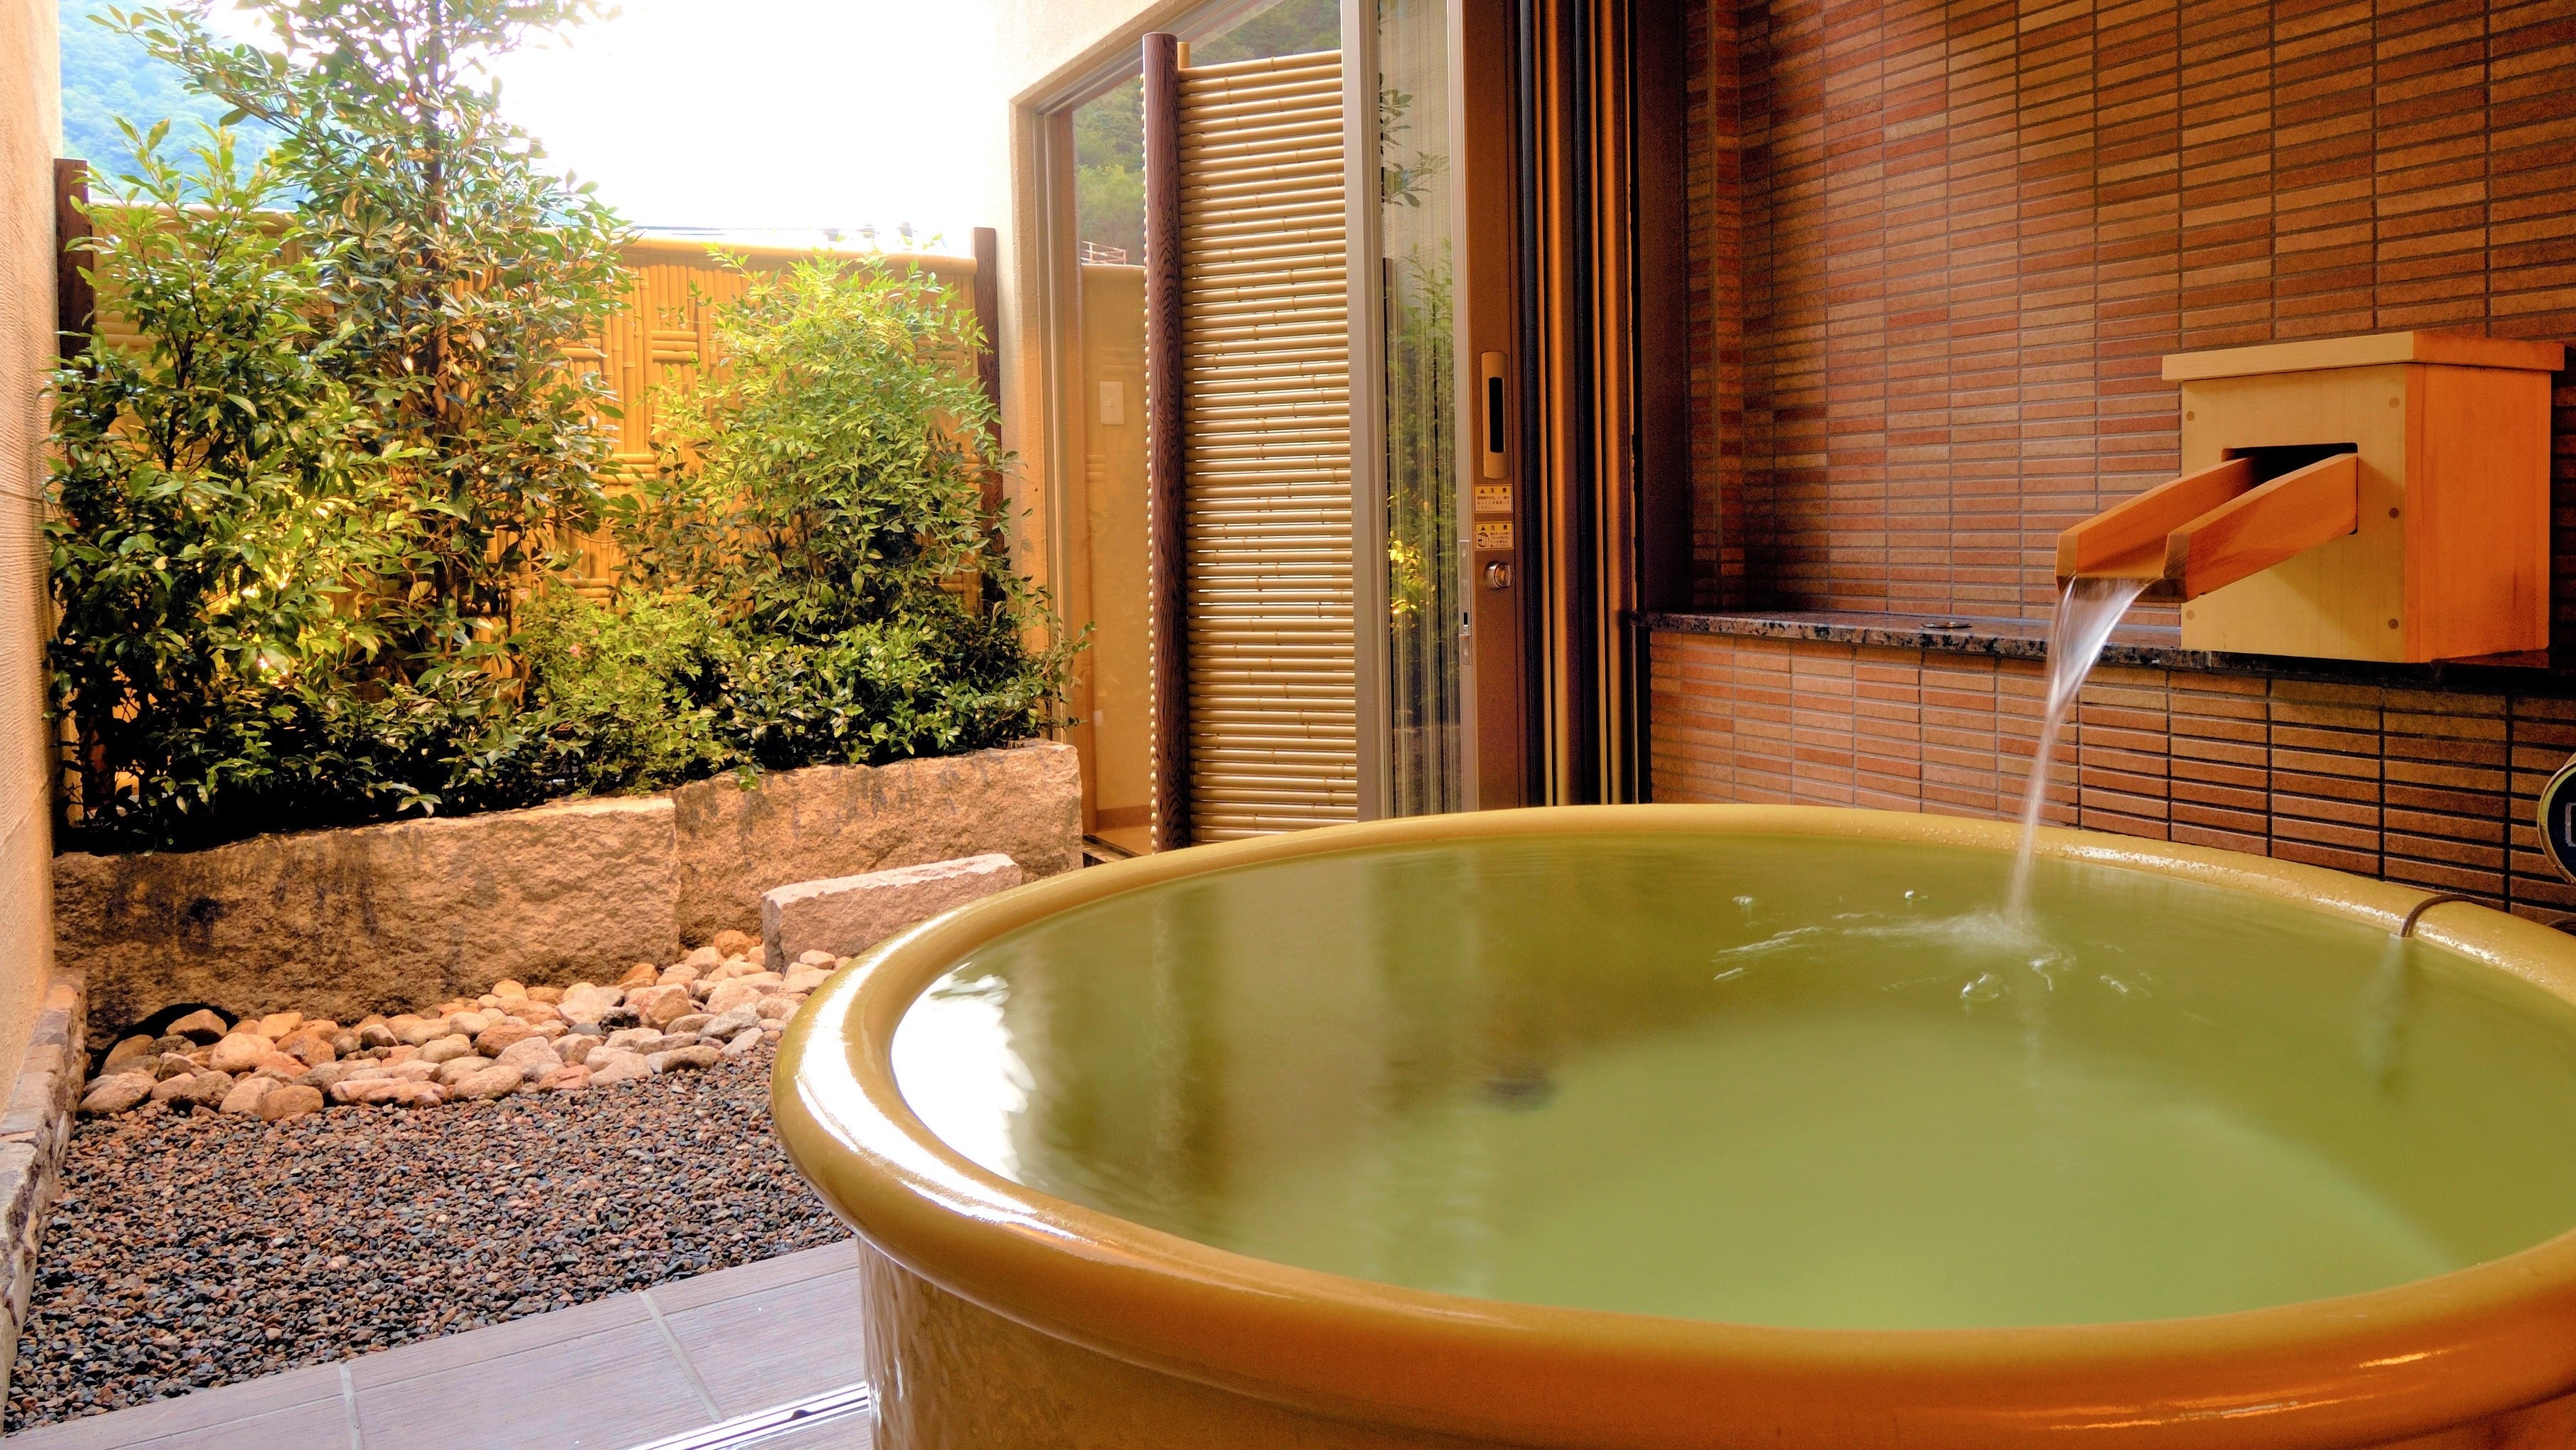 [City side] An example of a Japanese-Western style room (made of pottery) with a free-flowing open-air bath